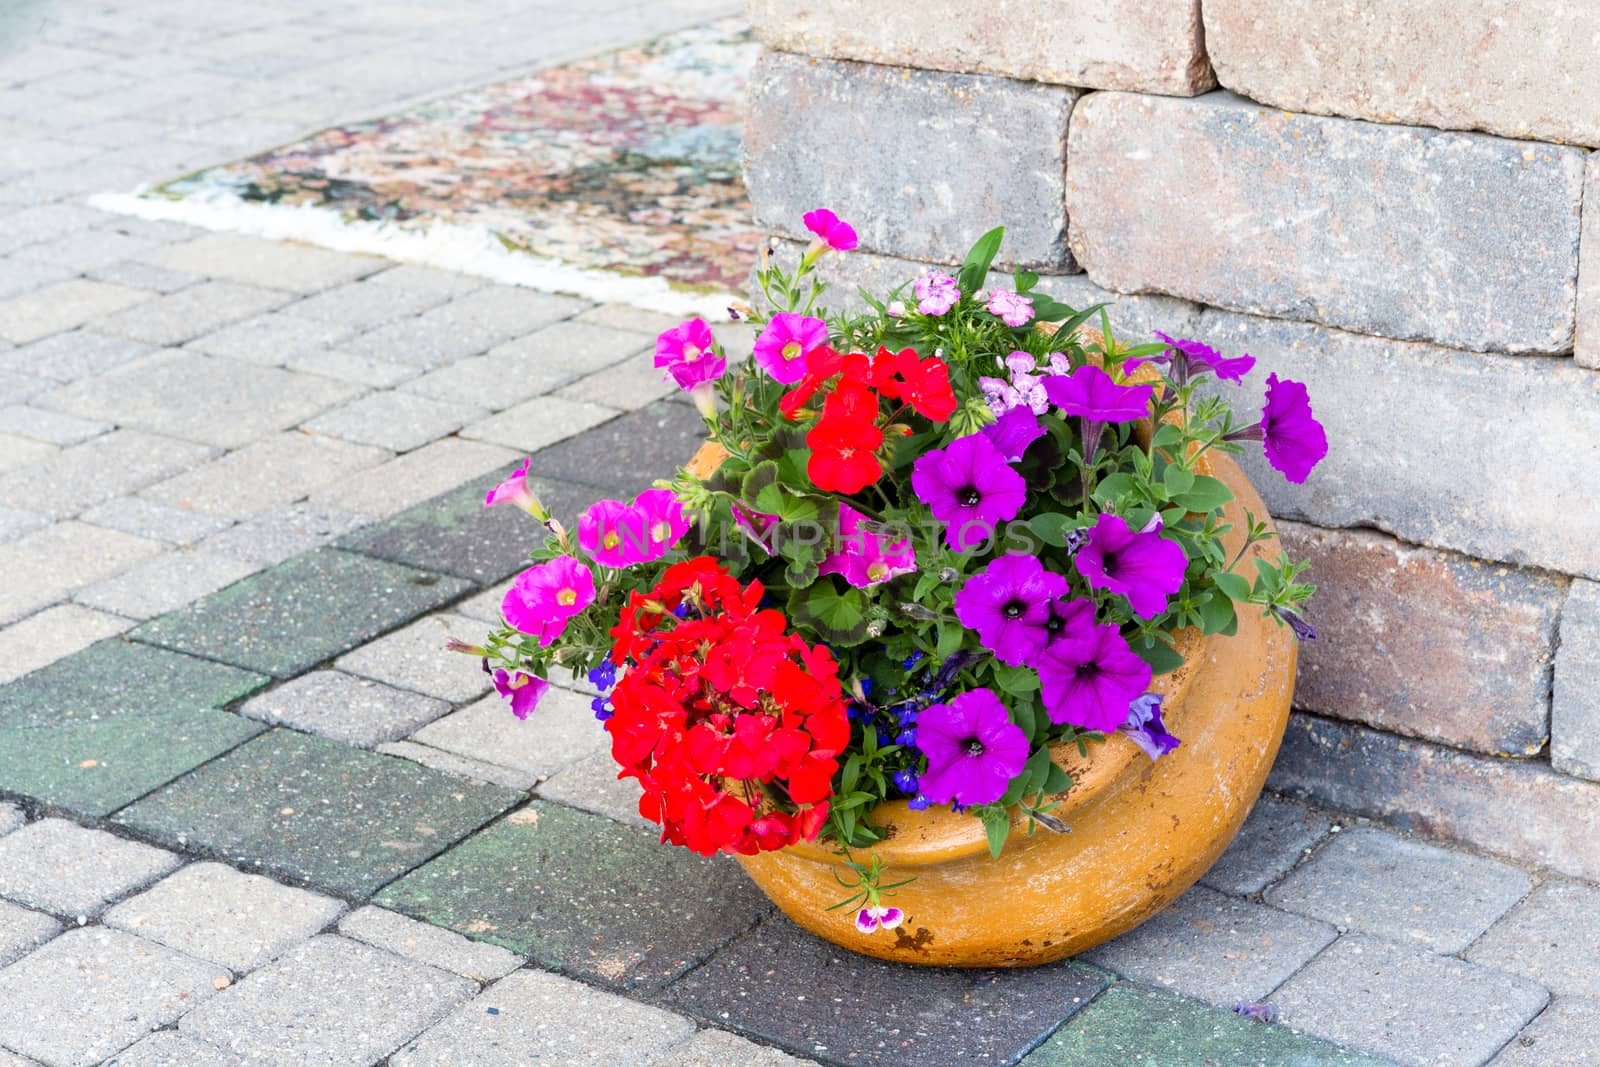 Ornamental display of colorful flowers in a tilted terracotta flowerpot standing at te edge of a building on a brick paved patio with red geraniums and purple petunias